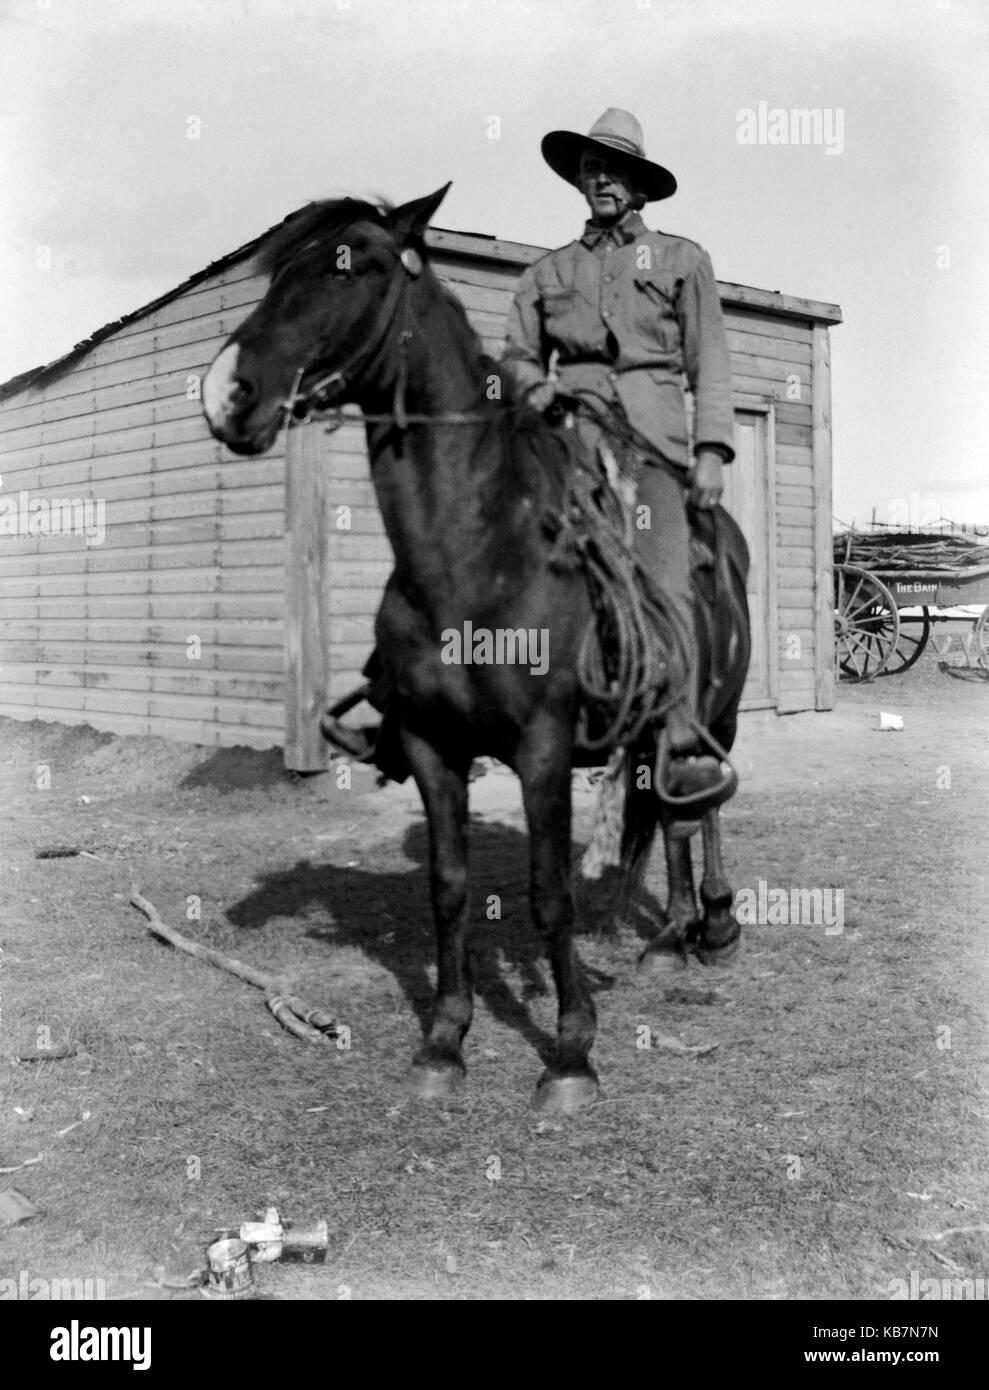 AJAXNETPHOTO. 1903. CANADA, EXACT LOCATION UNKNOWN. - NORTH WEST MOUNTED POLICEMAN ON HORSEBACK. PHOTOGRAPHER:UNKNOWN © DIGITAL IMAGE COPYRIGHT AJAX VINTAGE PICTURE LIBRARY SOURCE: AJAX VINTAGE PICTURE LIBRARY COLLECTION REF:AVL 2173 Stock Photo